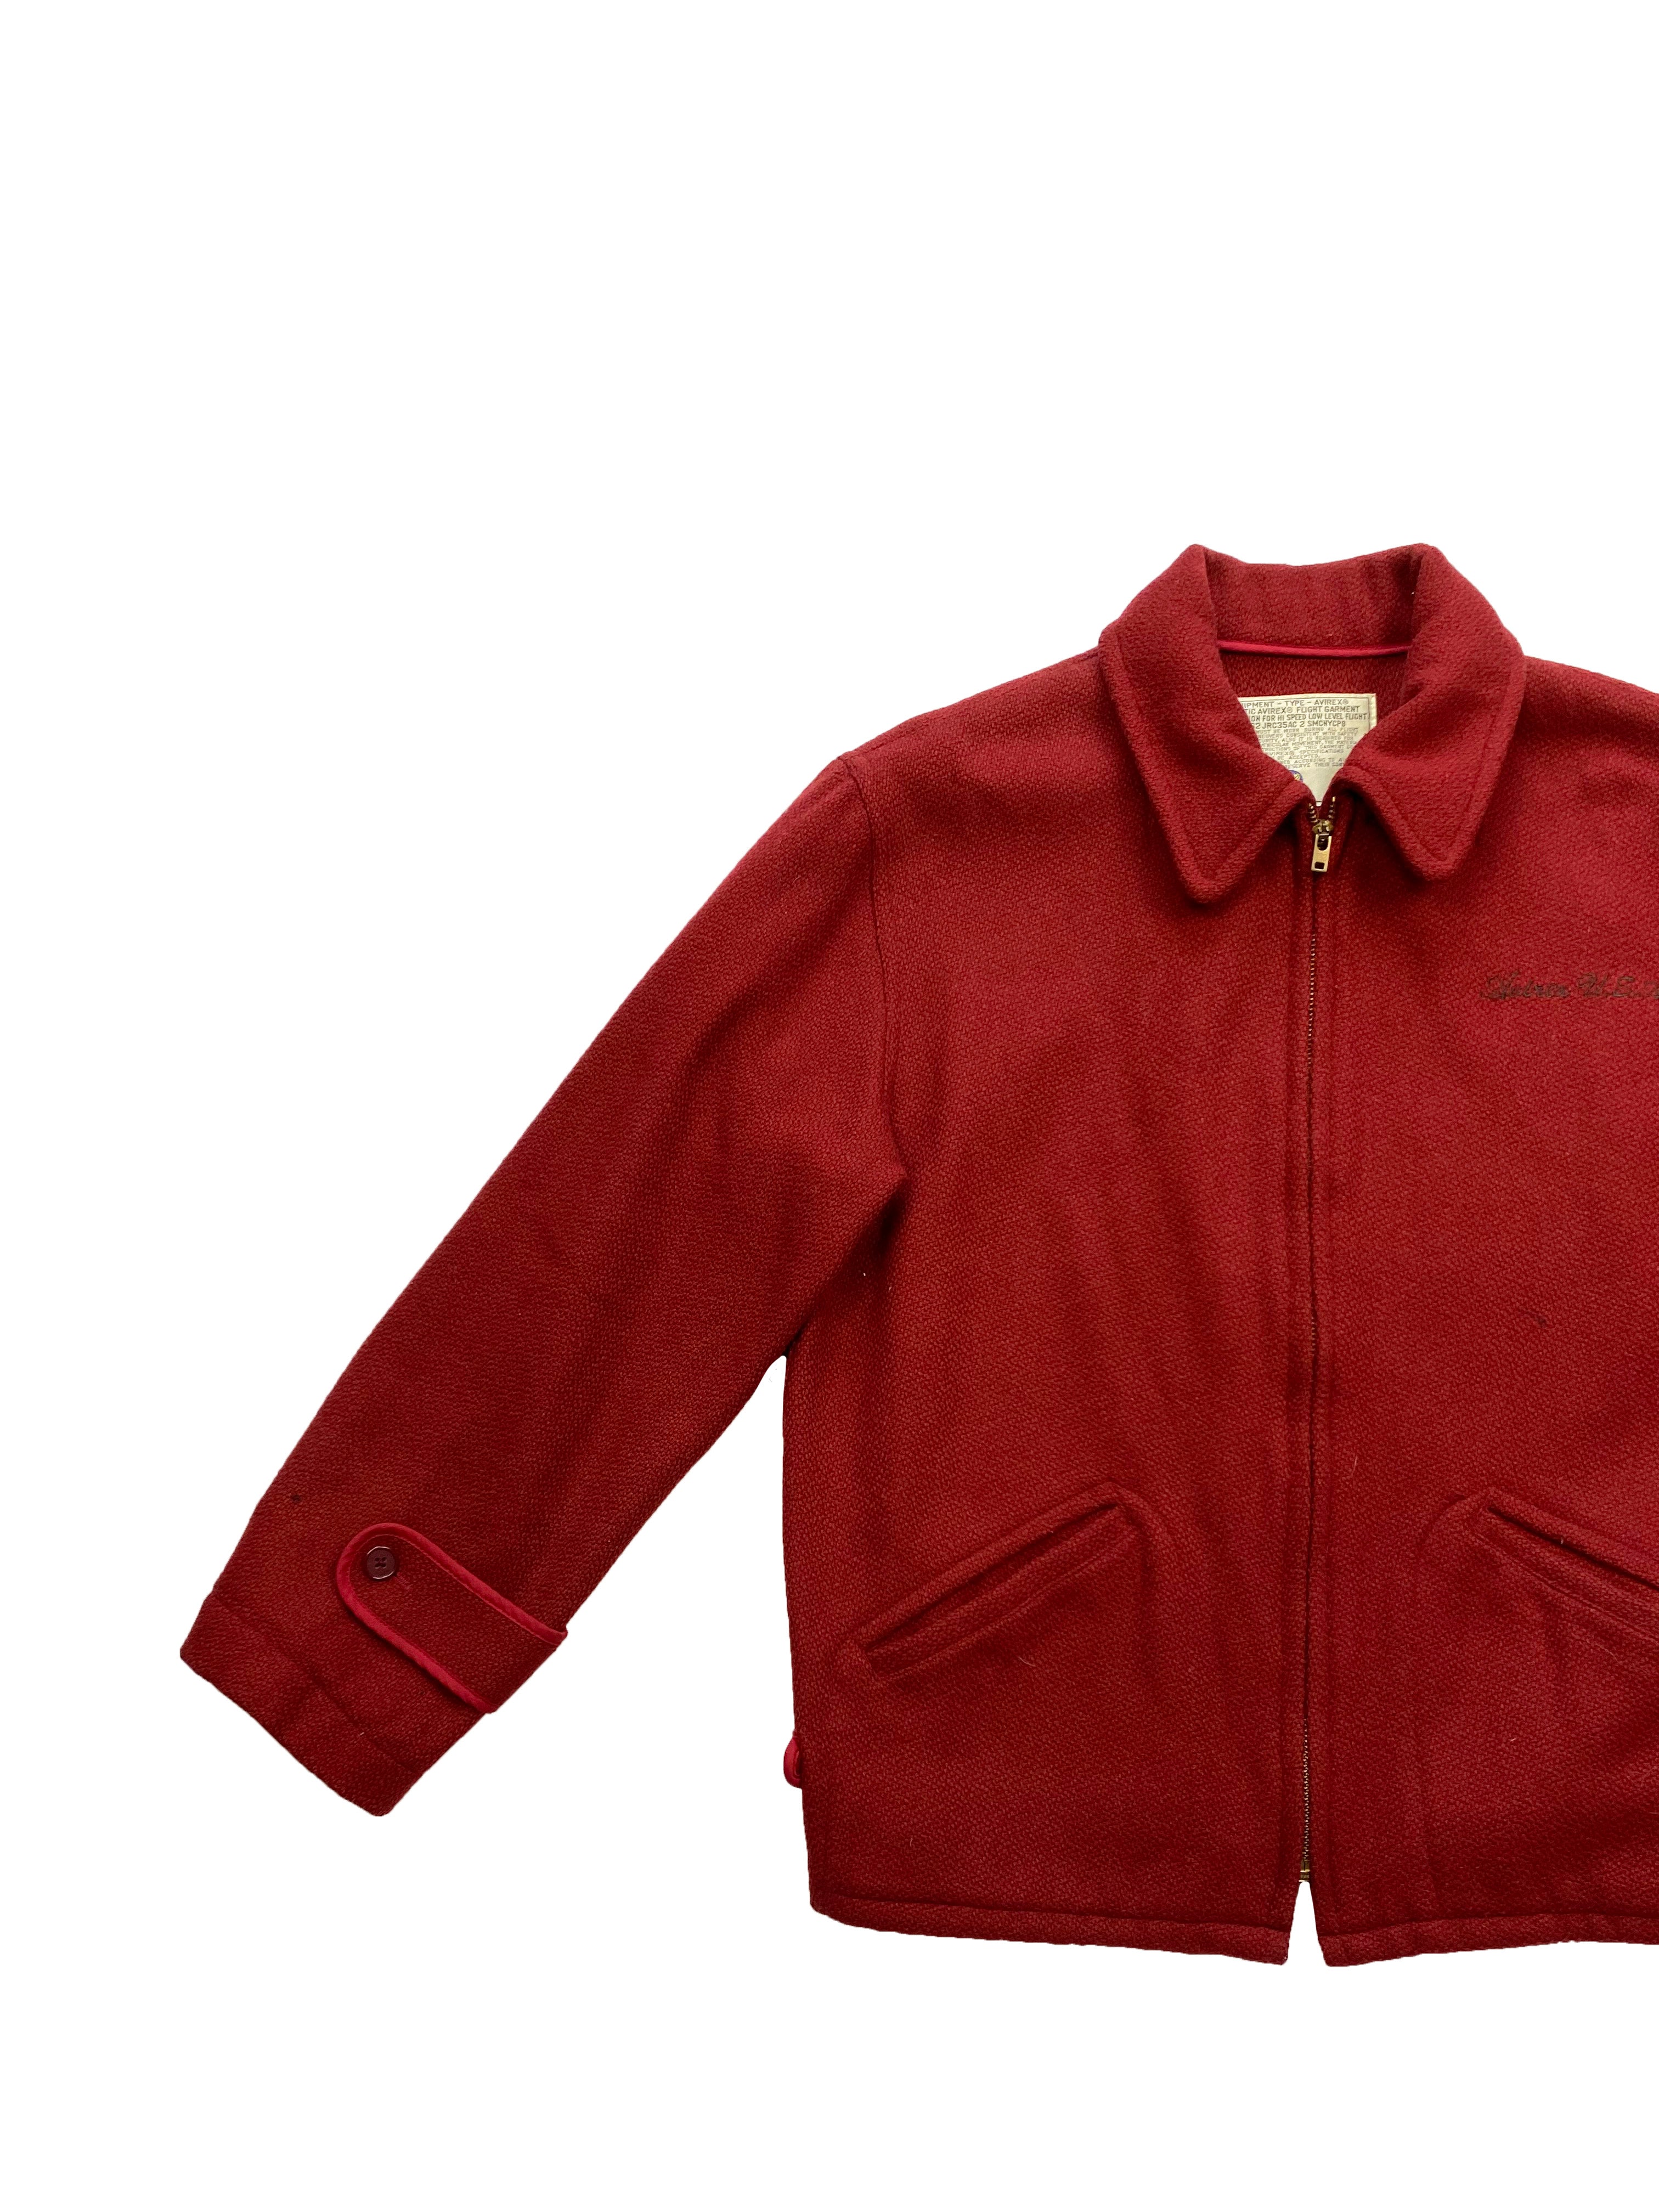 Avirex 'Forest Service' Red Jacket 80's